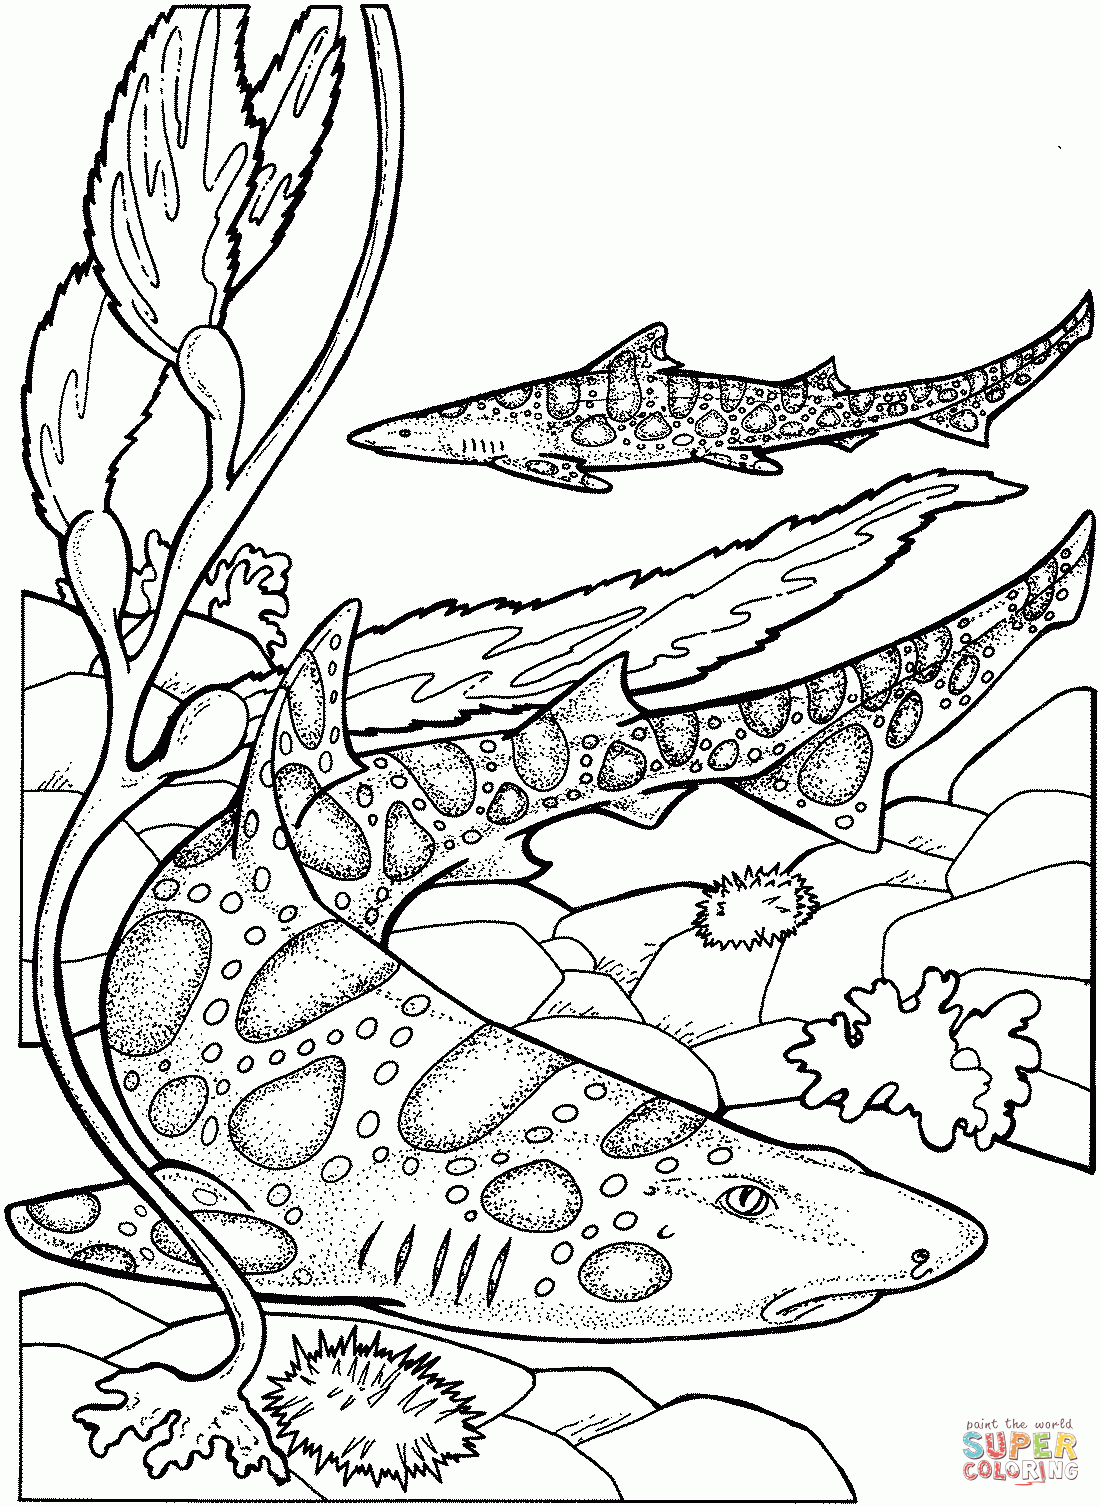 Leopard Sharks Coloring Page From Sharks Category. Select From 27237 - Free Printable Shark Coloring Pages